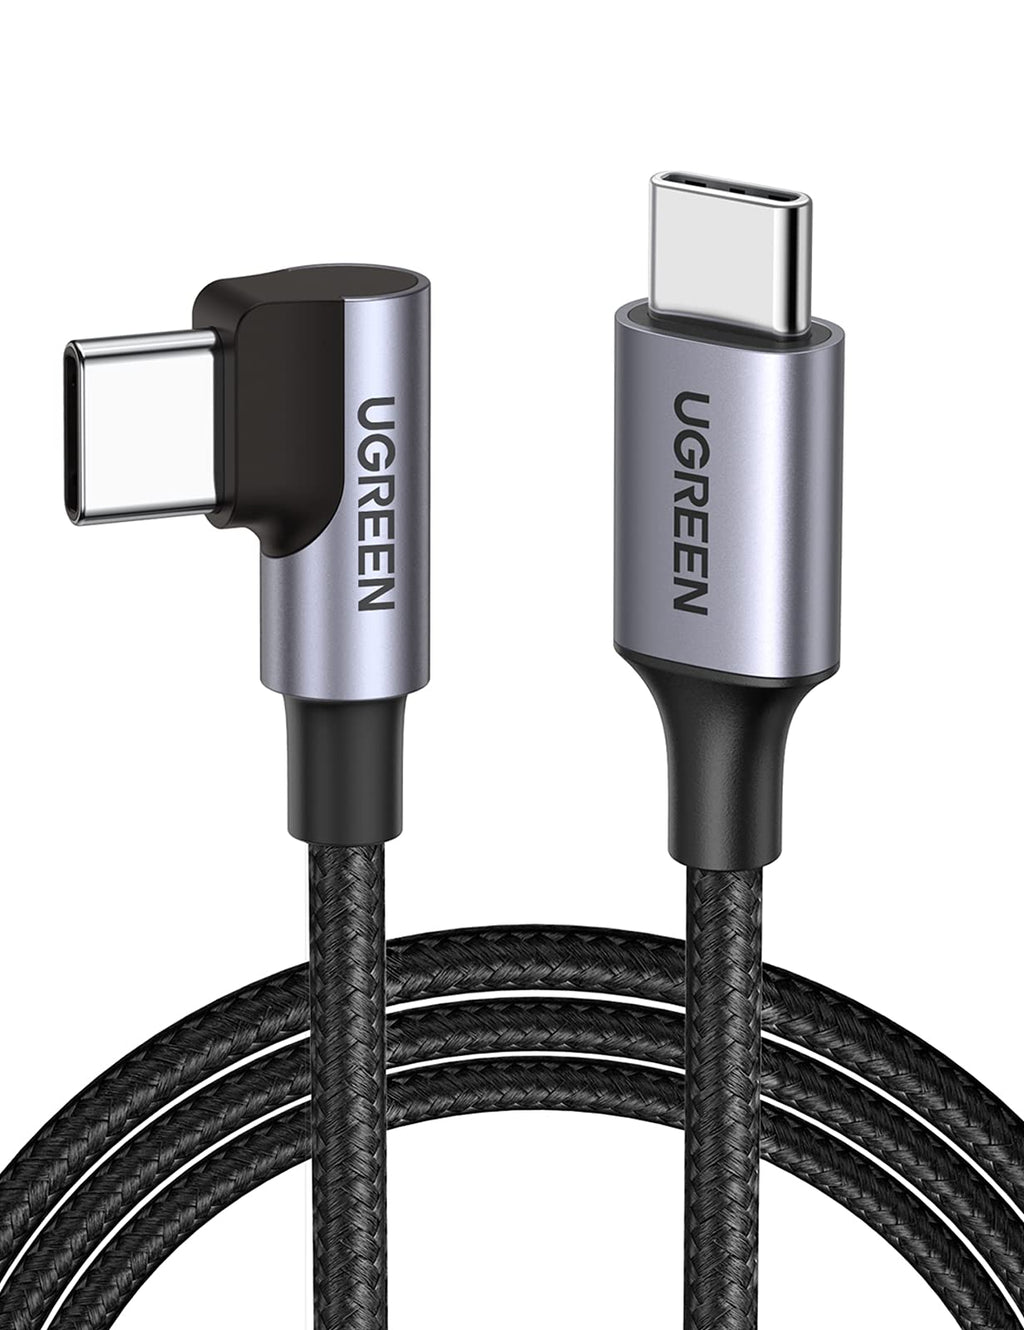 UGREEN USB C to USB C Cable Right Angle 90 Degree Type C 60W PD Fast Charge Compatible with Samsung Galaxy S21 S20 S10 Note 20 10 Google Pixel 4 3 XL MacBook Pro Air 13" iPad Pro 2021 2020 Switch 6FT - LeoForward Australia